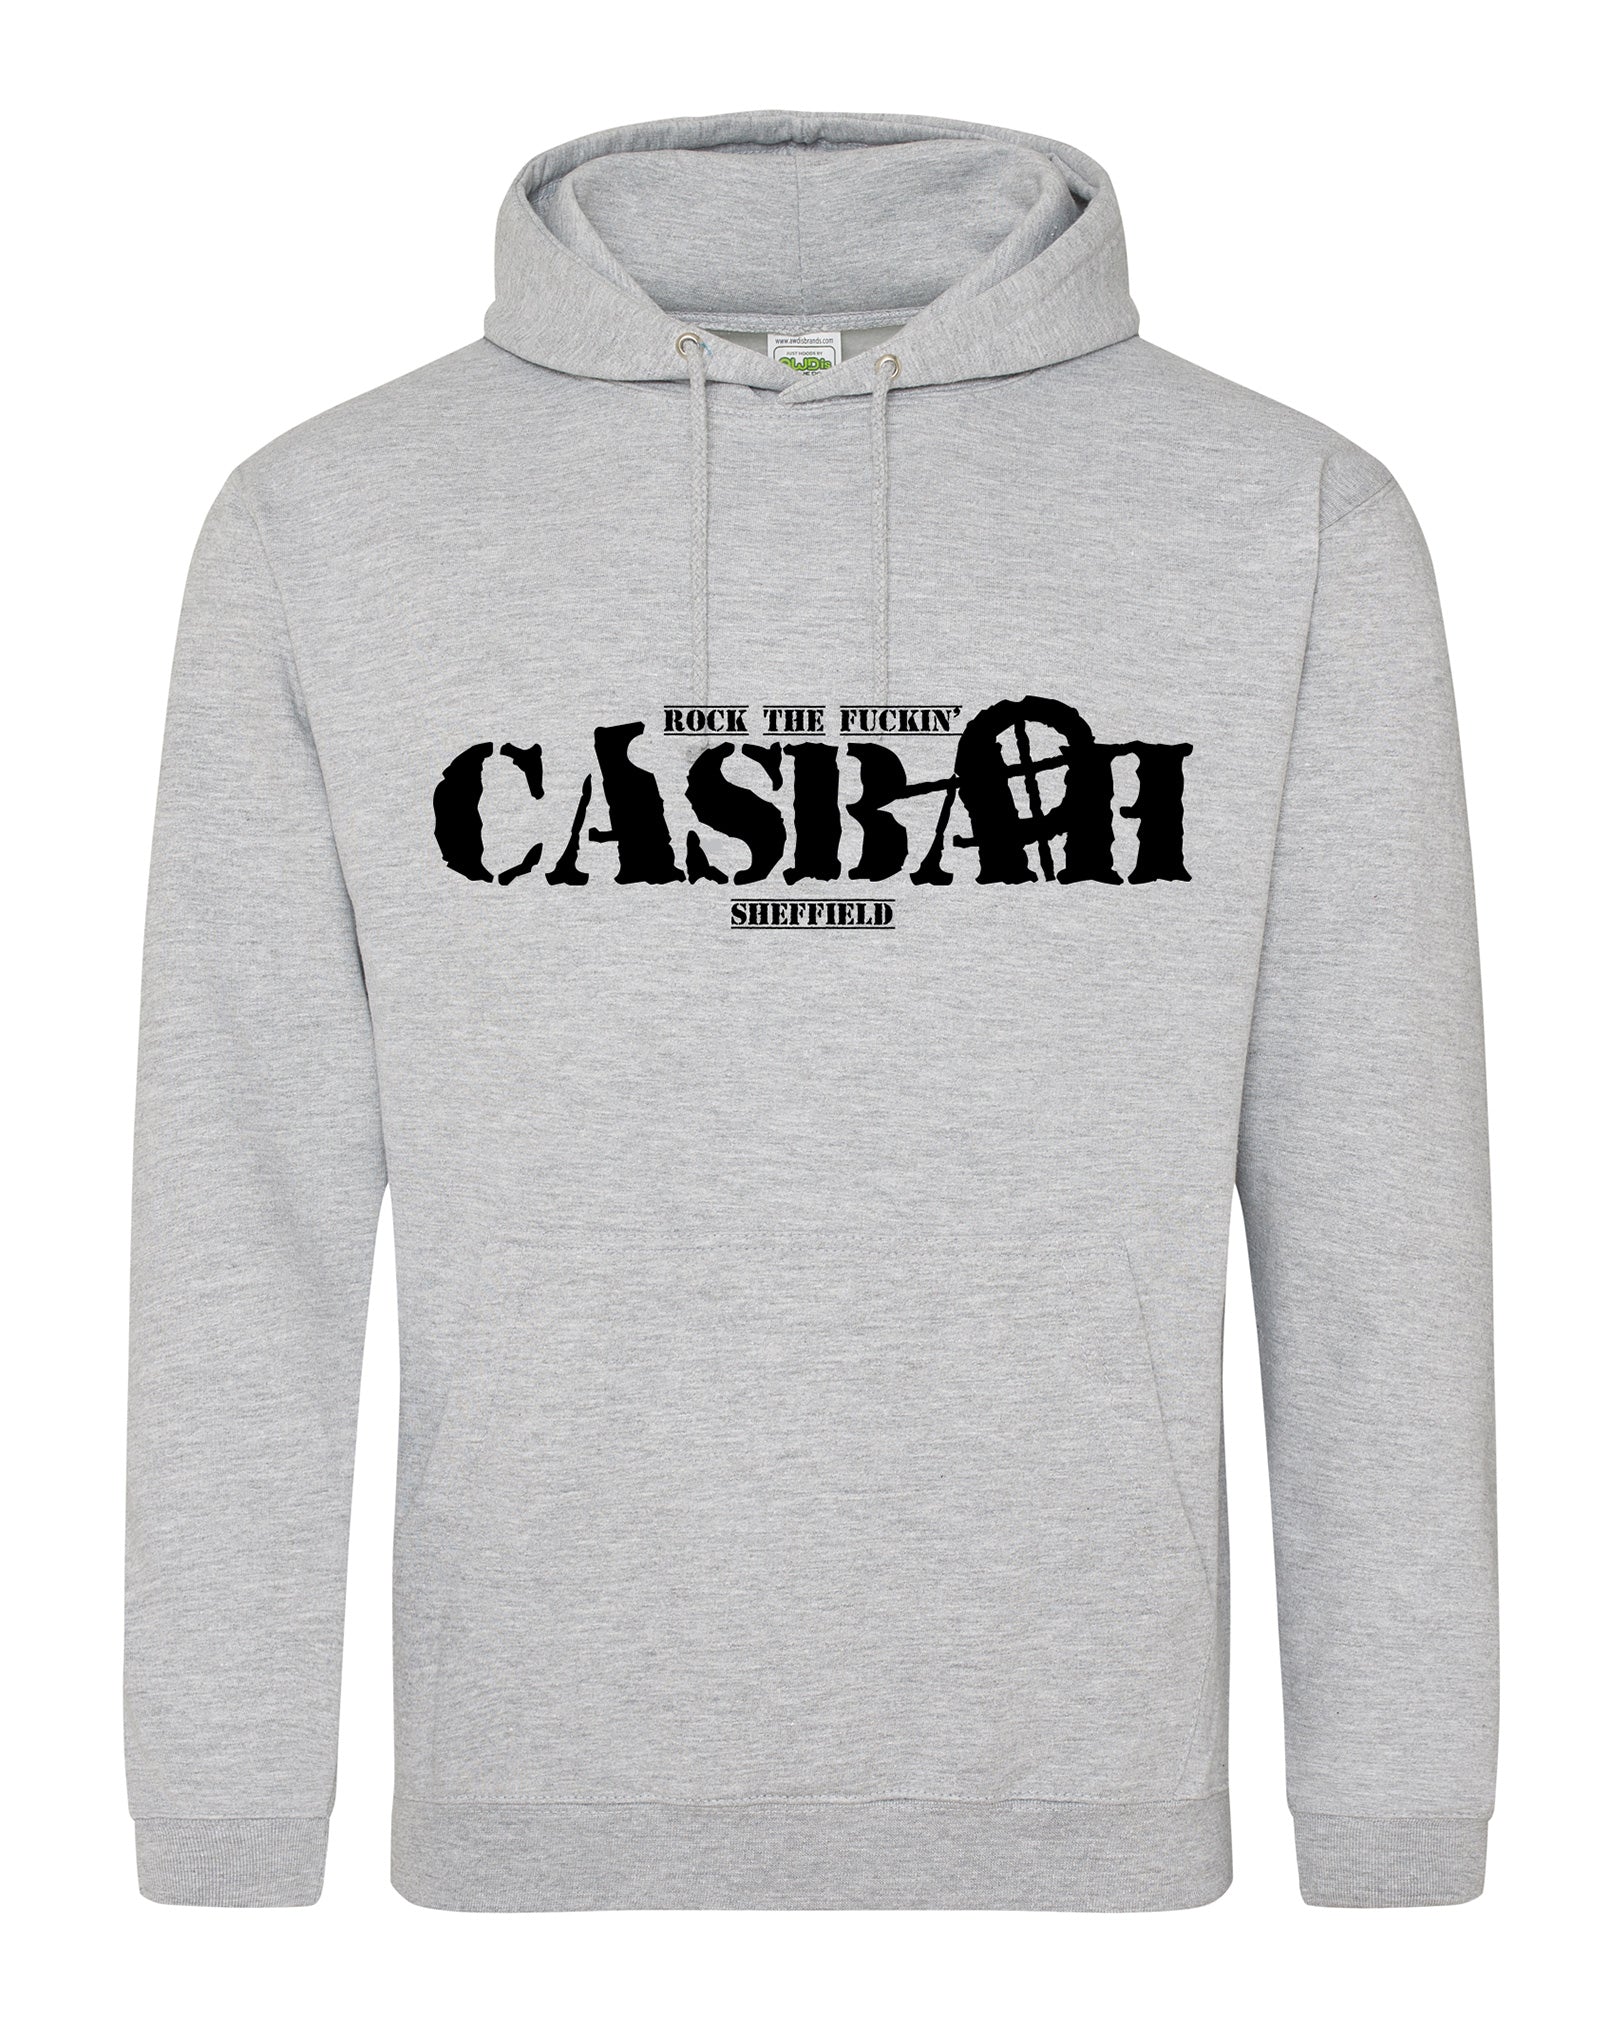 Casbah unisex fit hoodie - various colours - Dirty Stop Outs